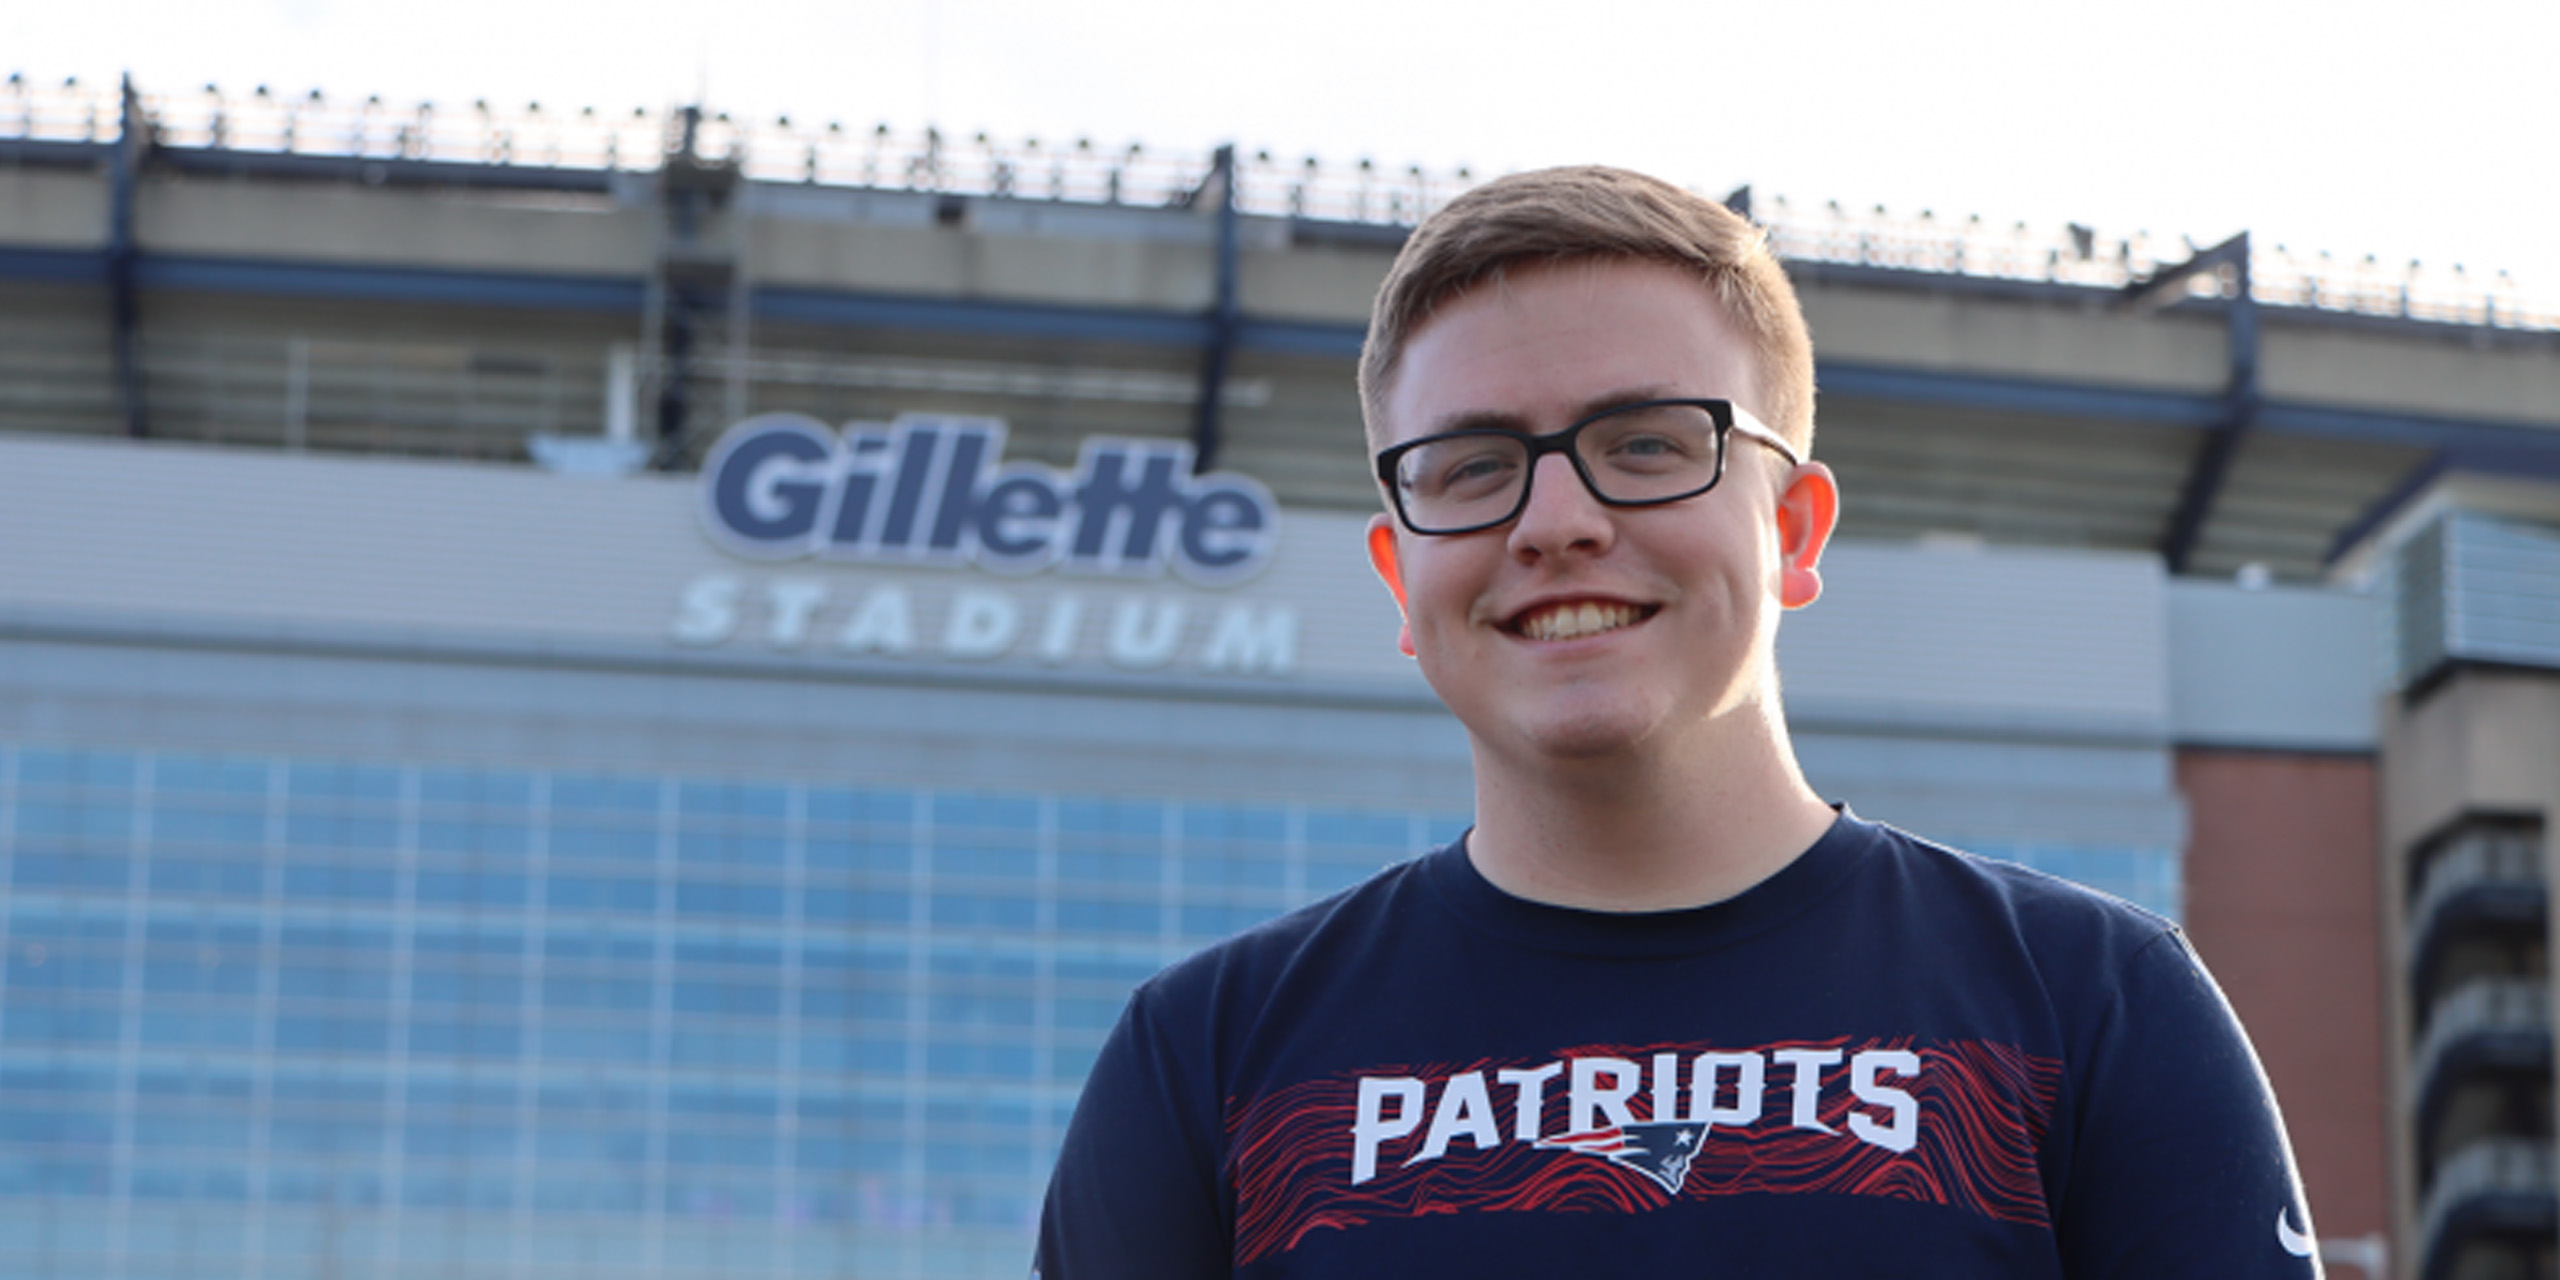 Student standing in front of Gillette Stadium.